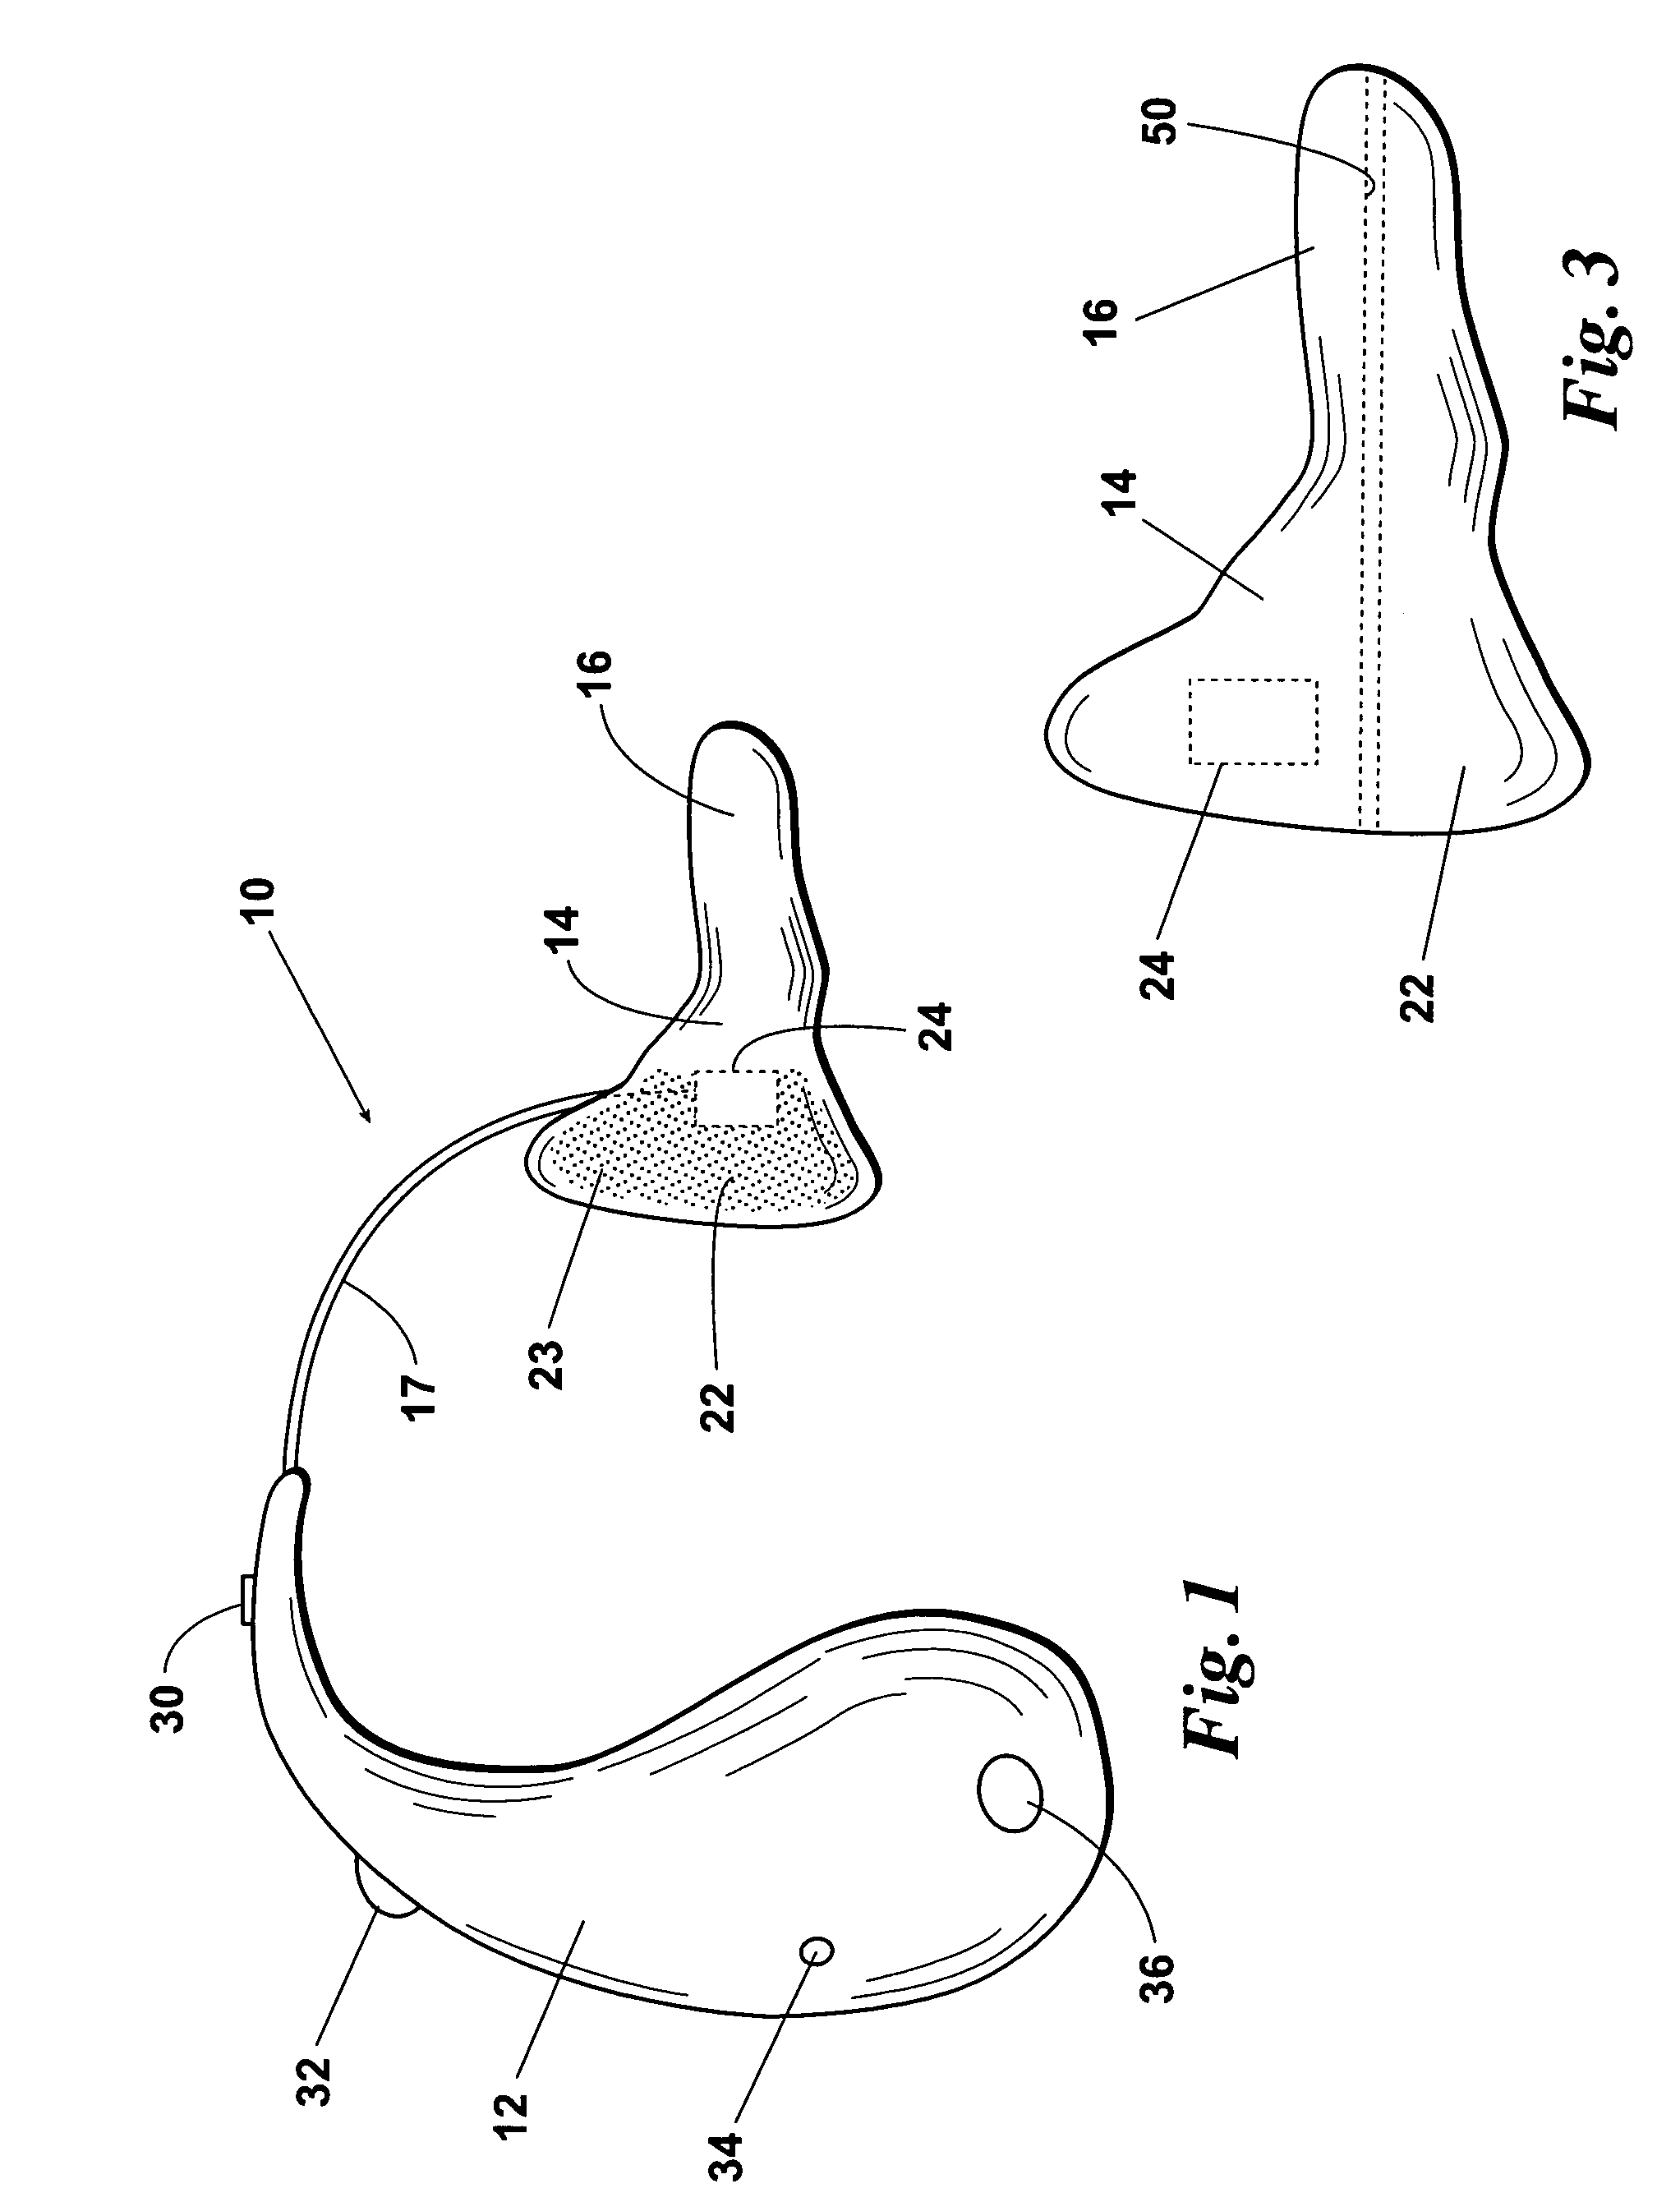 Bone conduction hearing assistance device